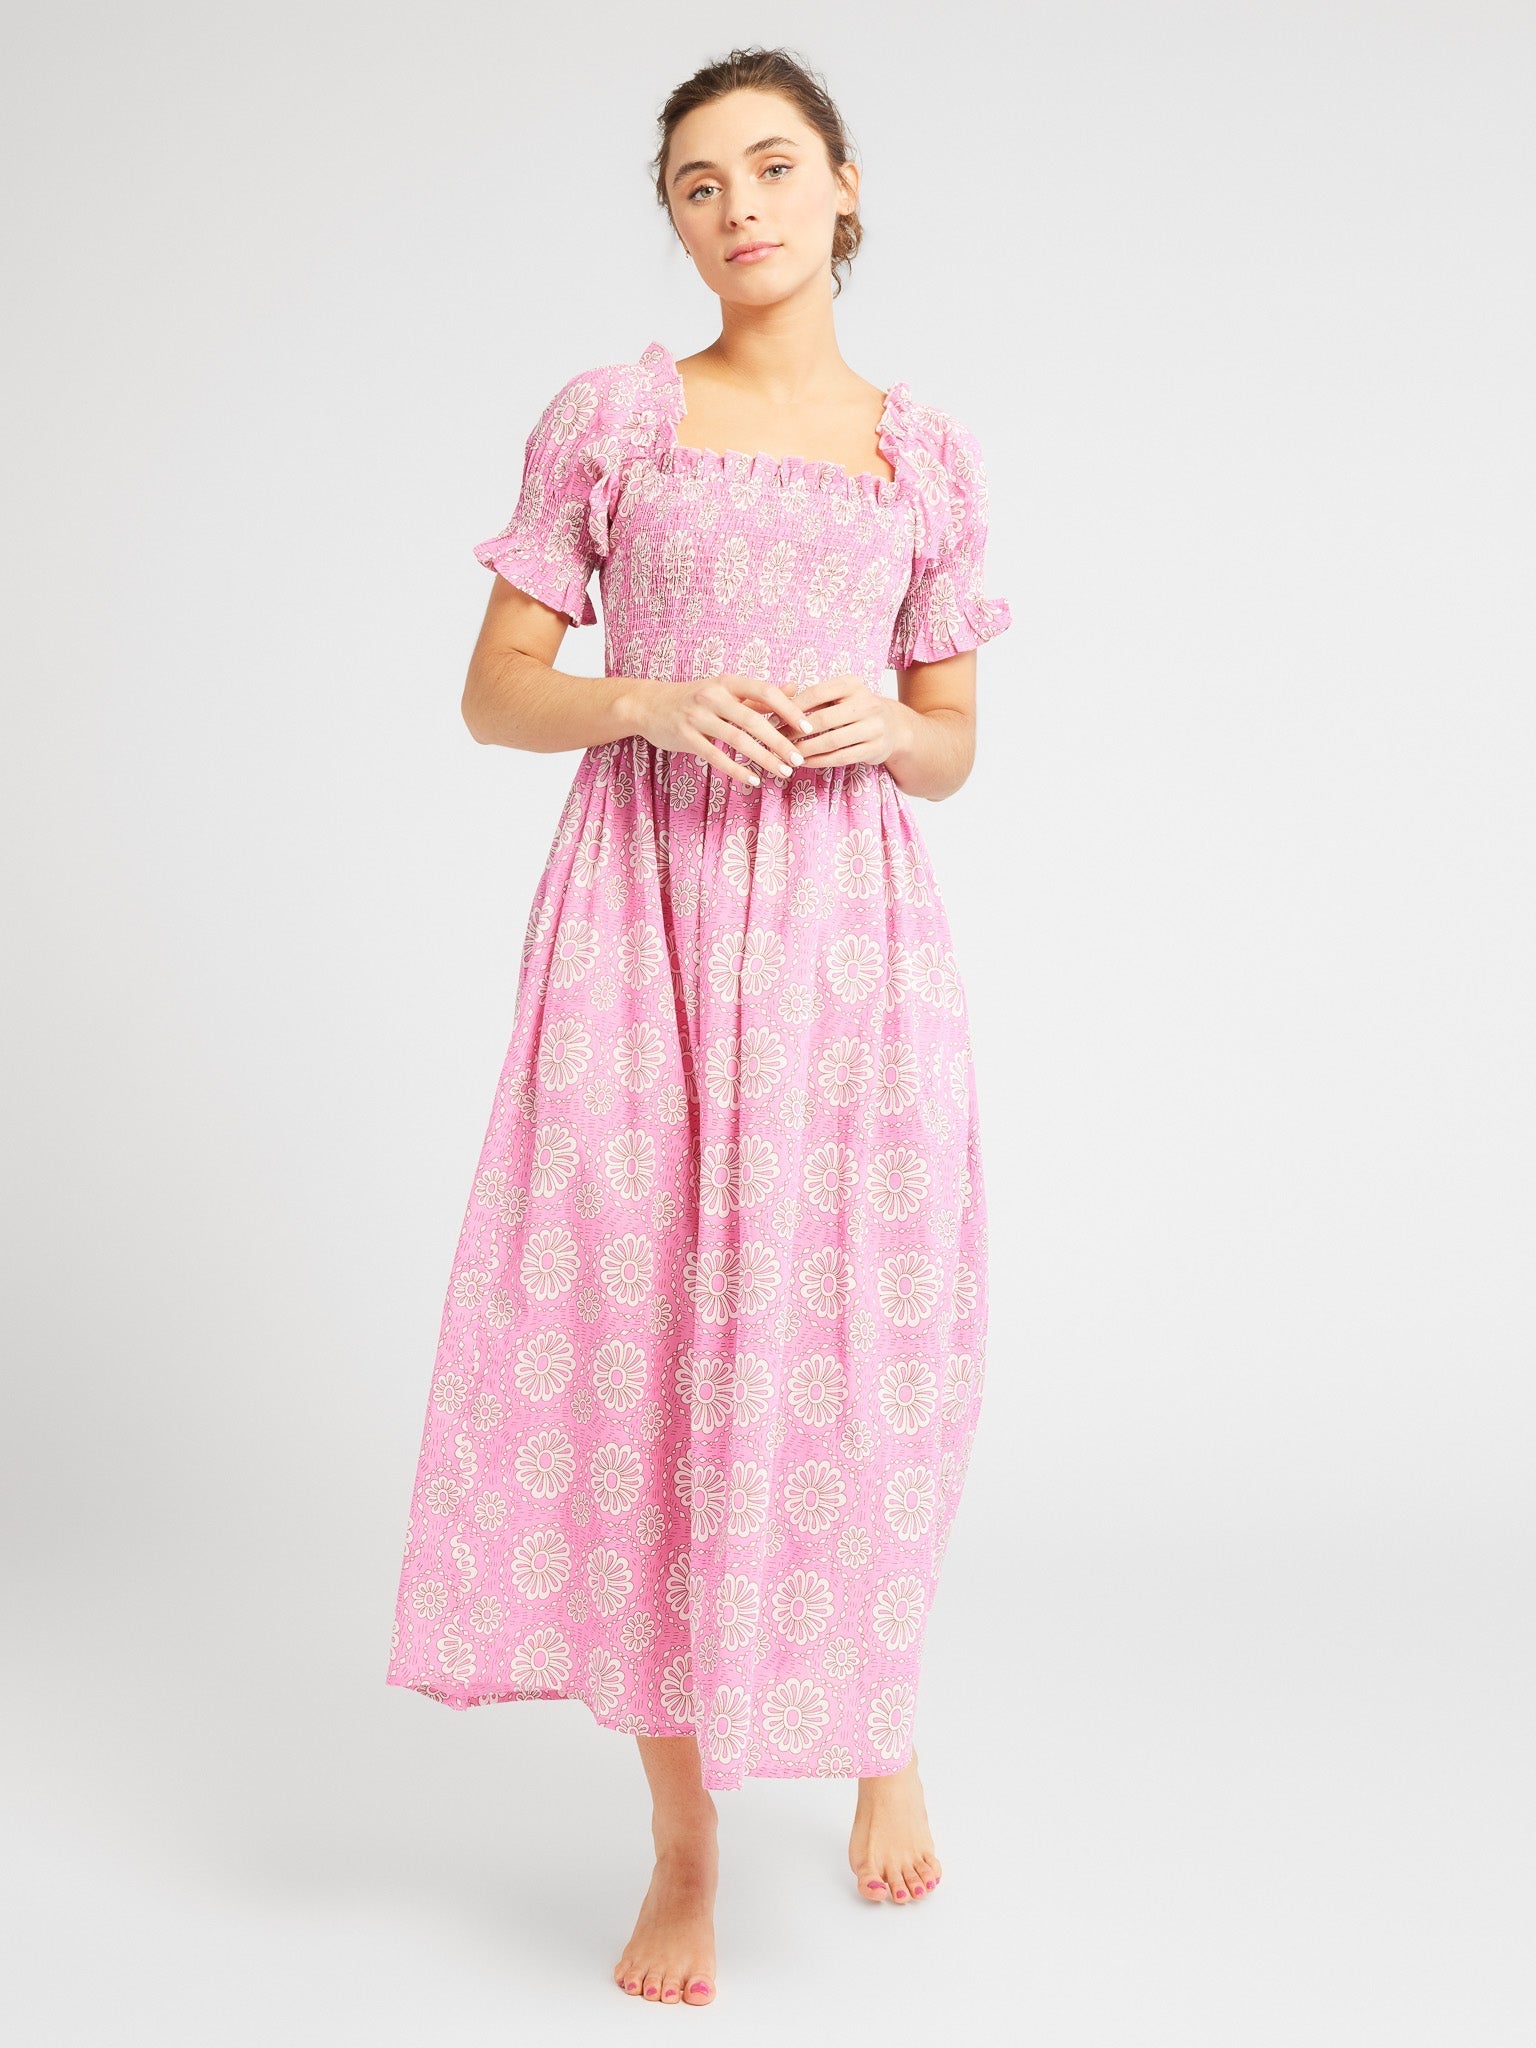 MILLE Clothing Cate Dress in Pink Daisy